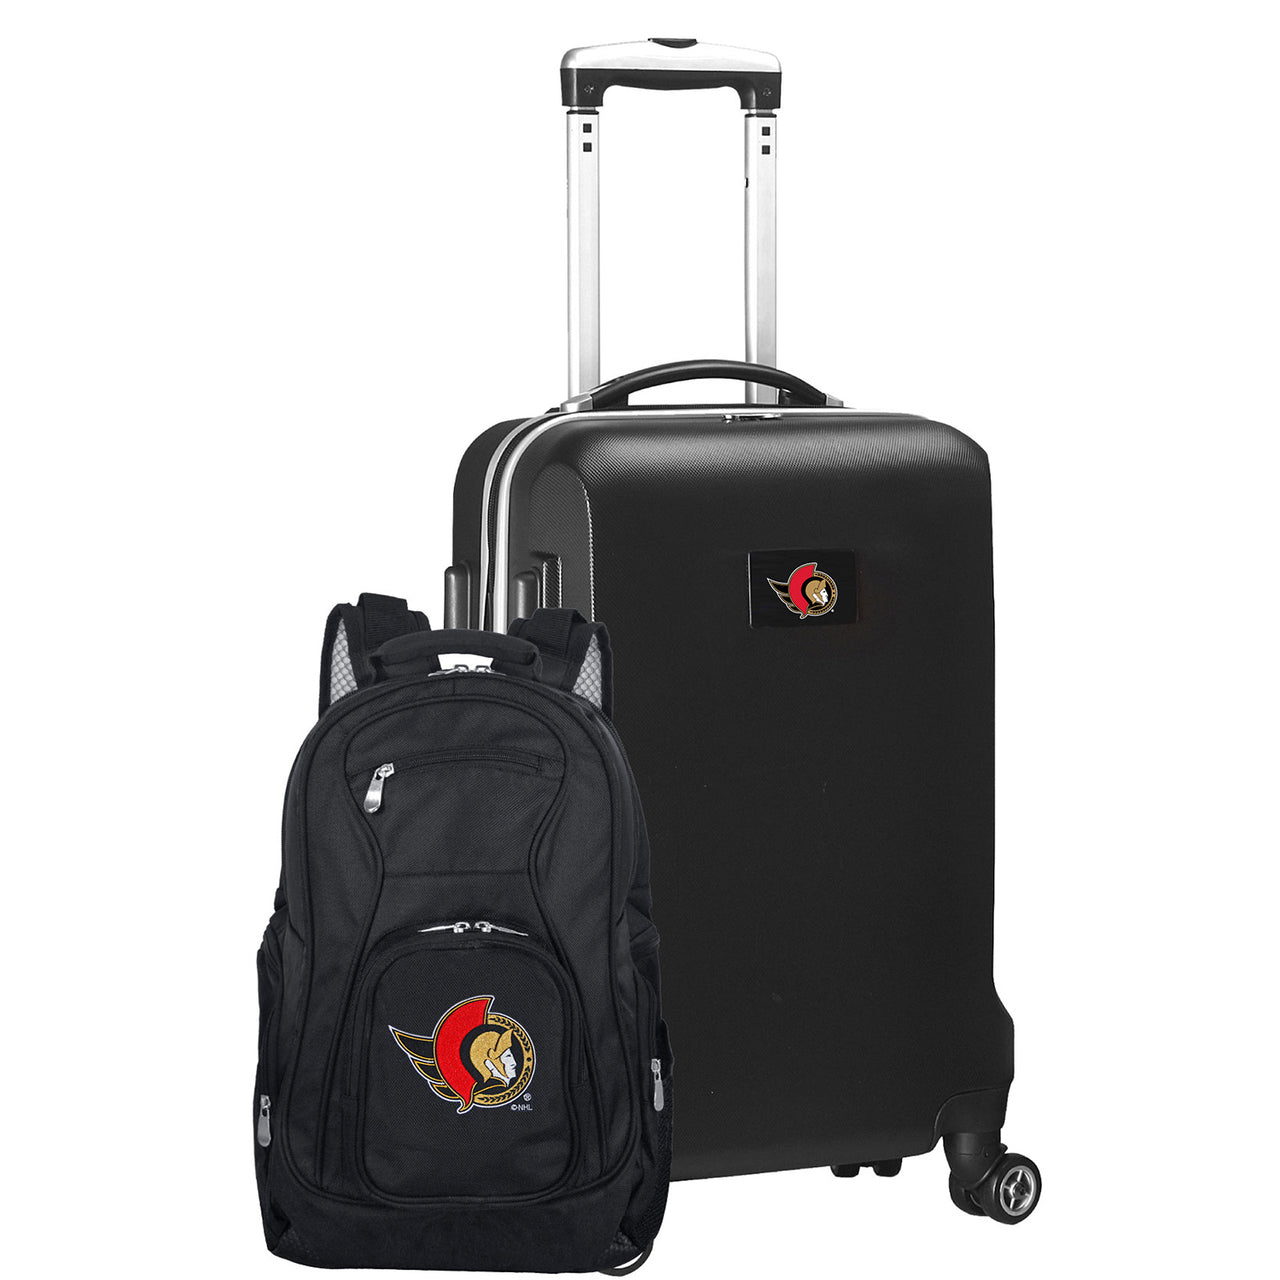 Ottawa Senators Deluxe 2-Piece Backpack and Carry-on Set in Black